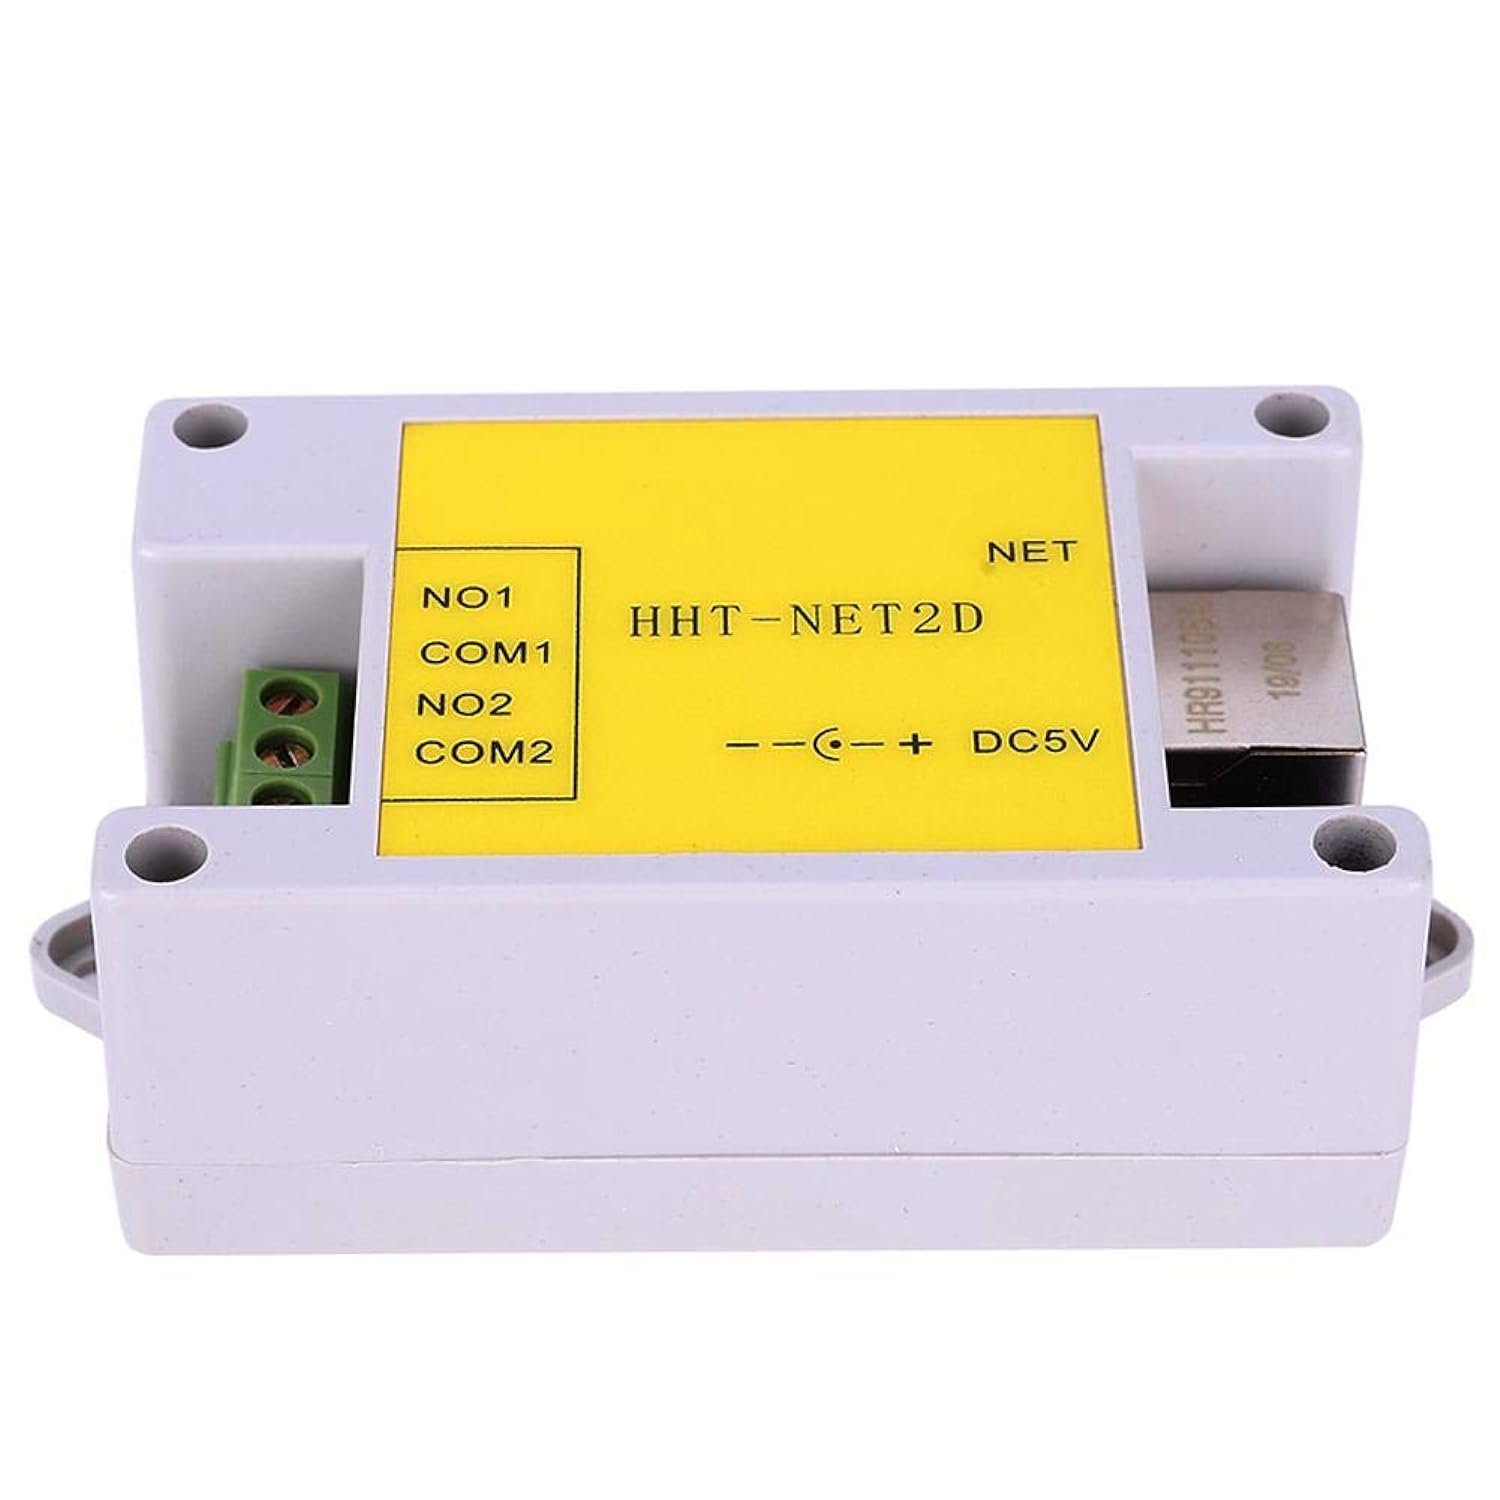 Great Choice Products 2 Channel Support Modbus Tcp Protocol Dc 5V Relay Module, 3.2 X 2 X 1.2Inch Network Relay, Tcp Client And Udp Mode For Smart …